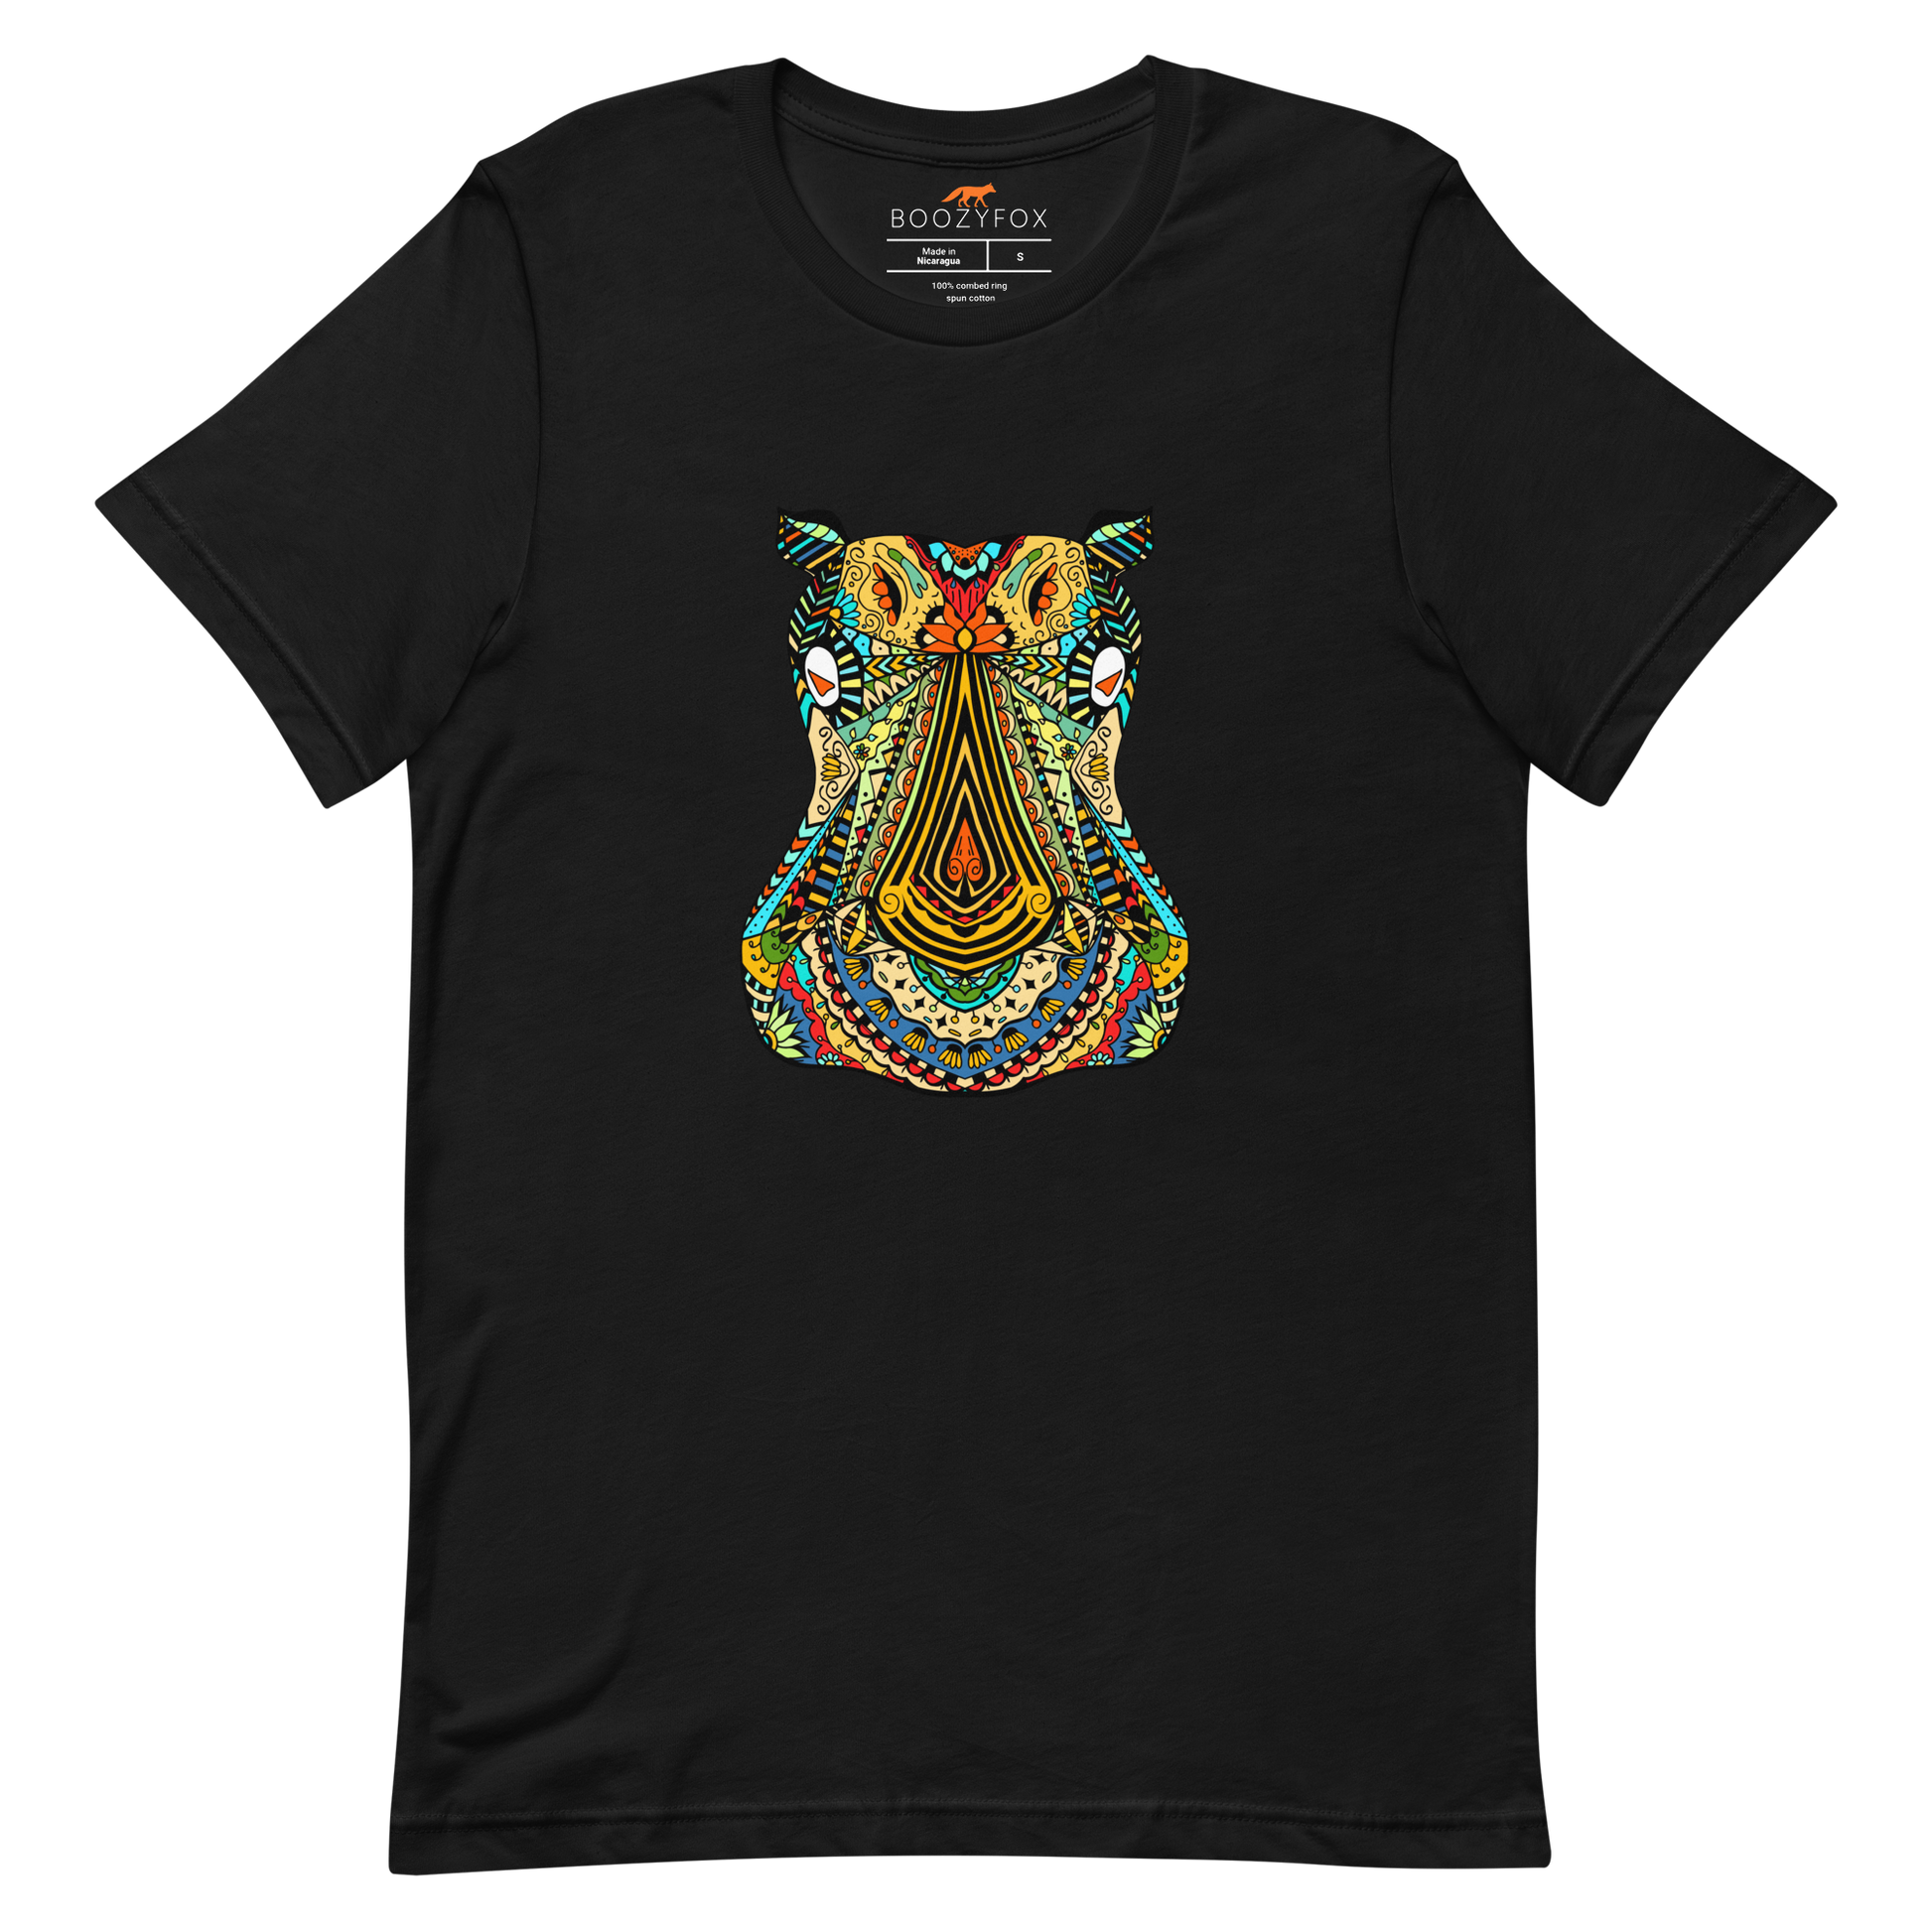 Black Premium Hippo T-Shirt featuring a mesmerizing Zentangle Hippo graphic on the chest - Cool Graphic Hippo Tees - Boozy Fox